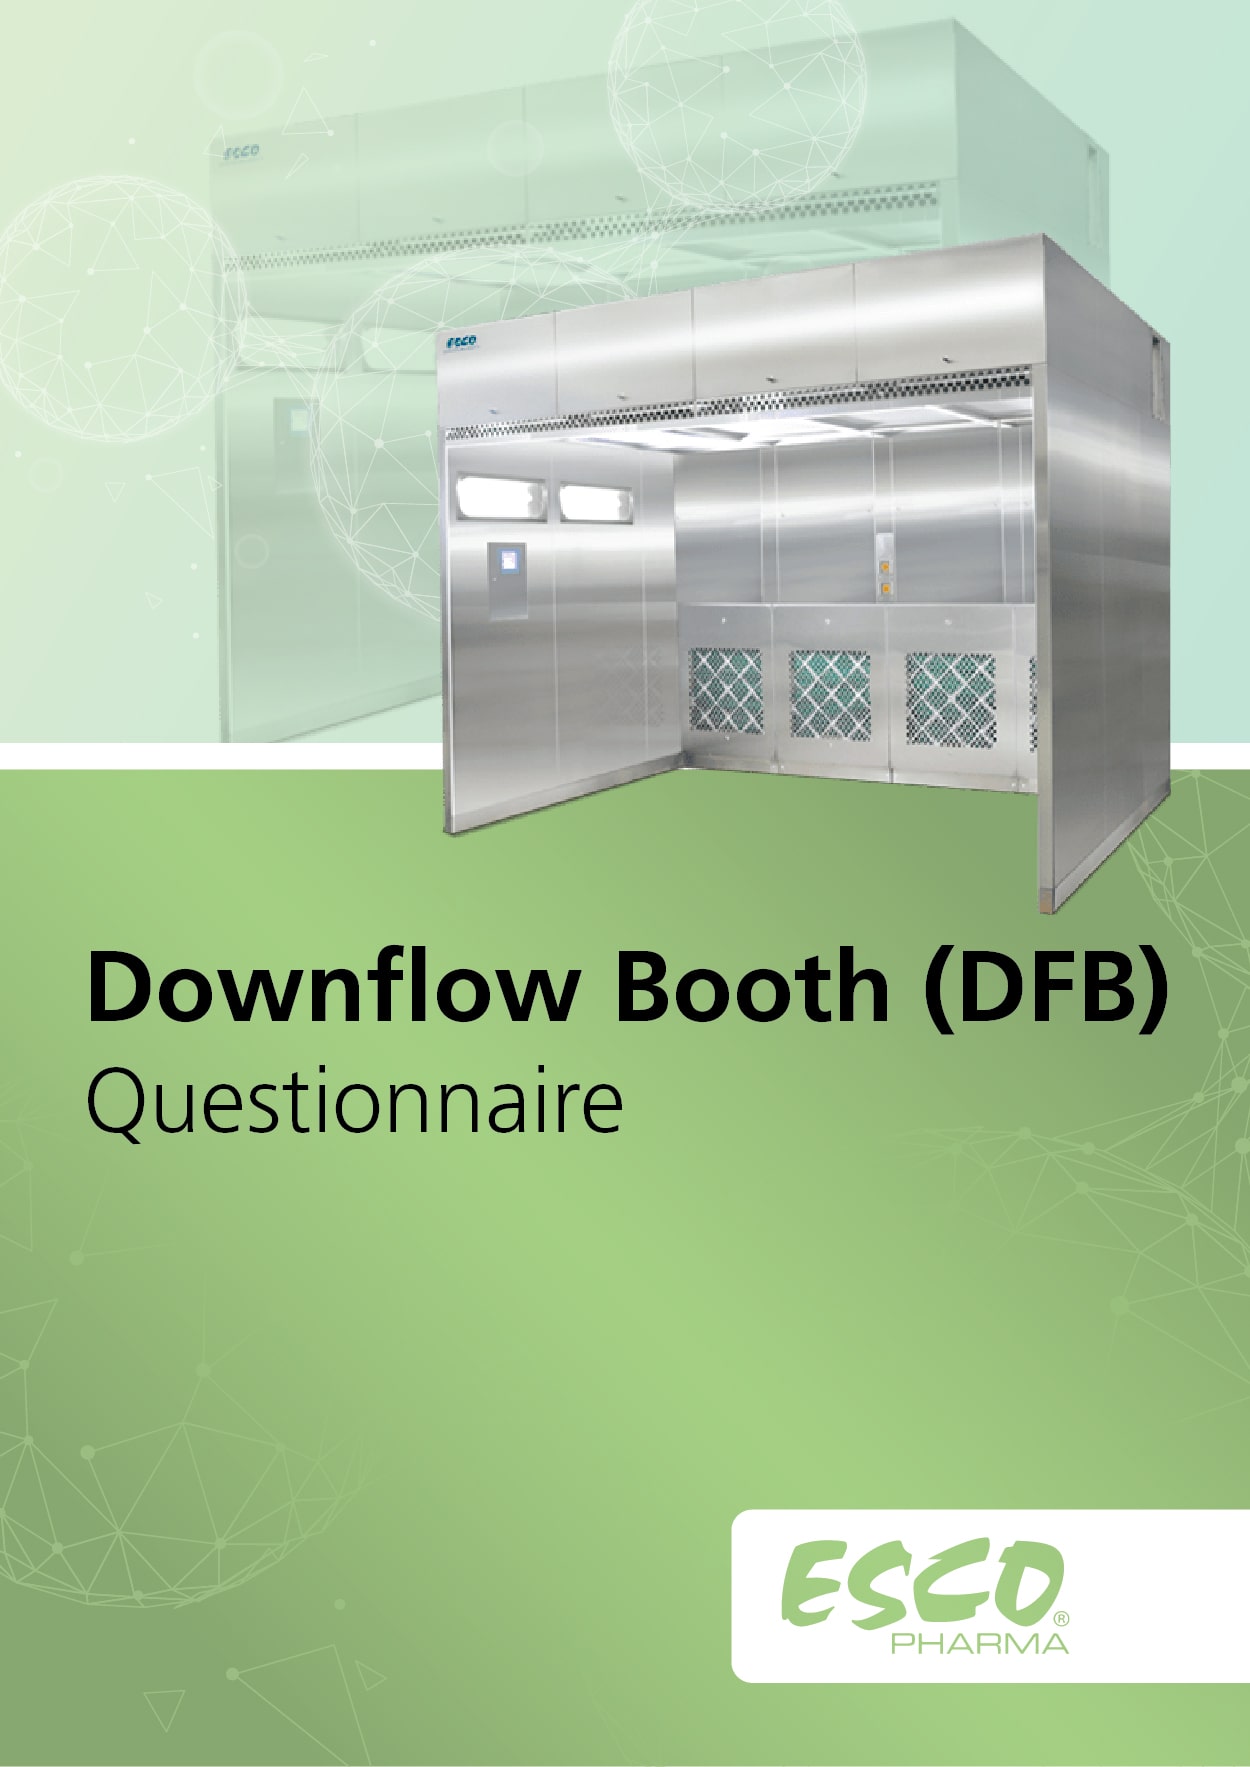 Downflow Booth (DFB)